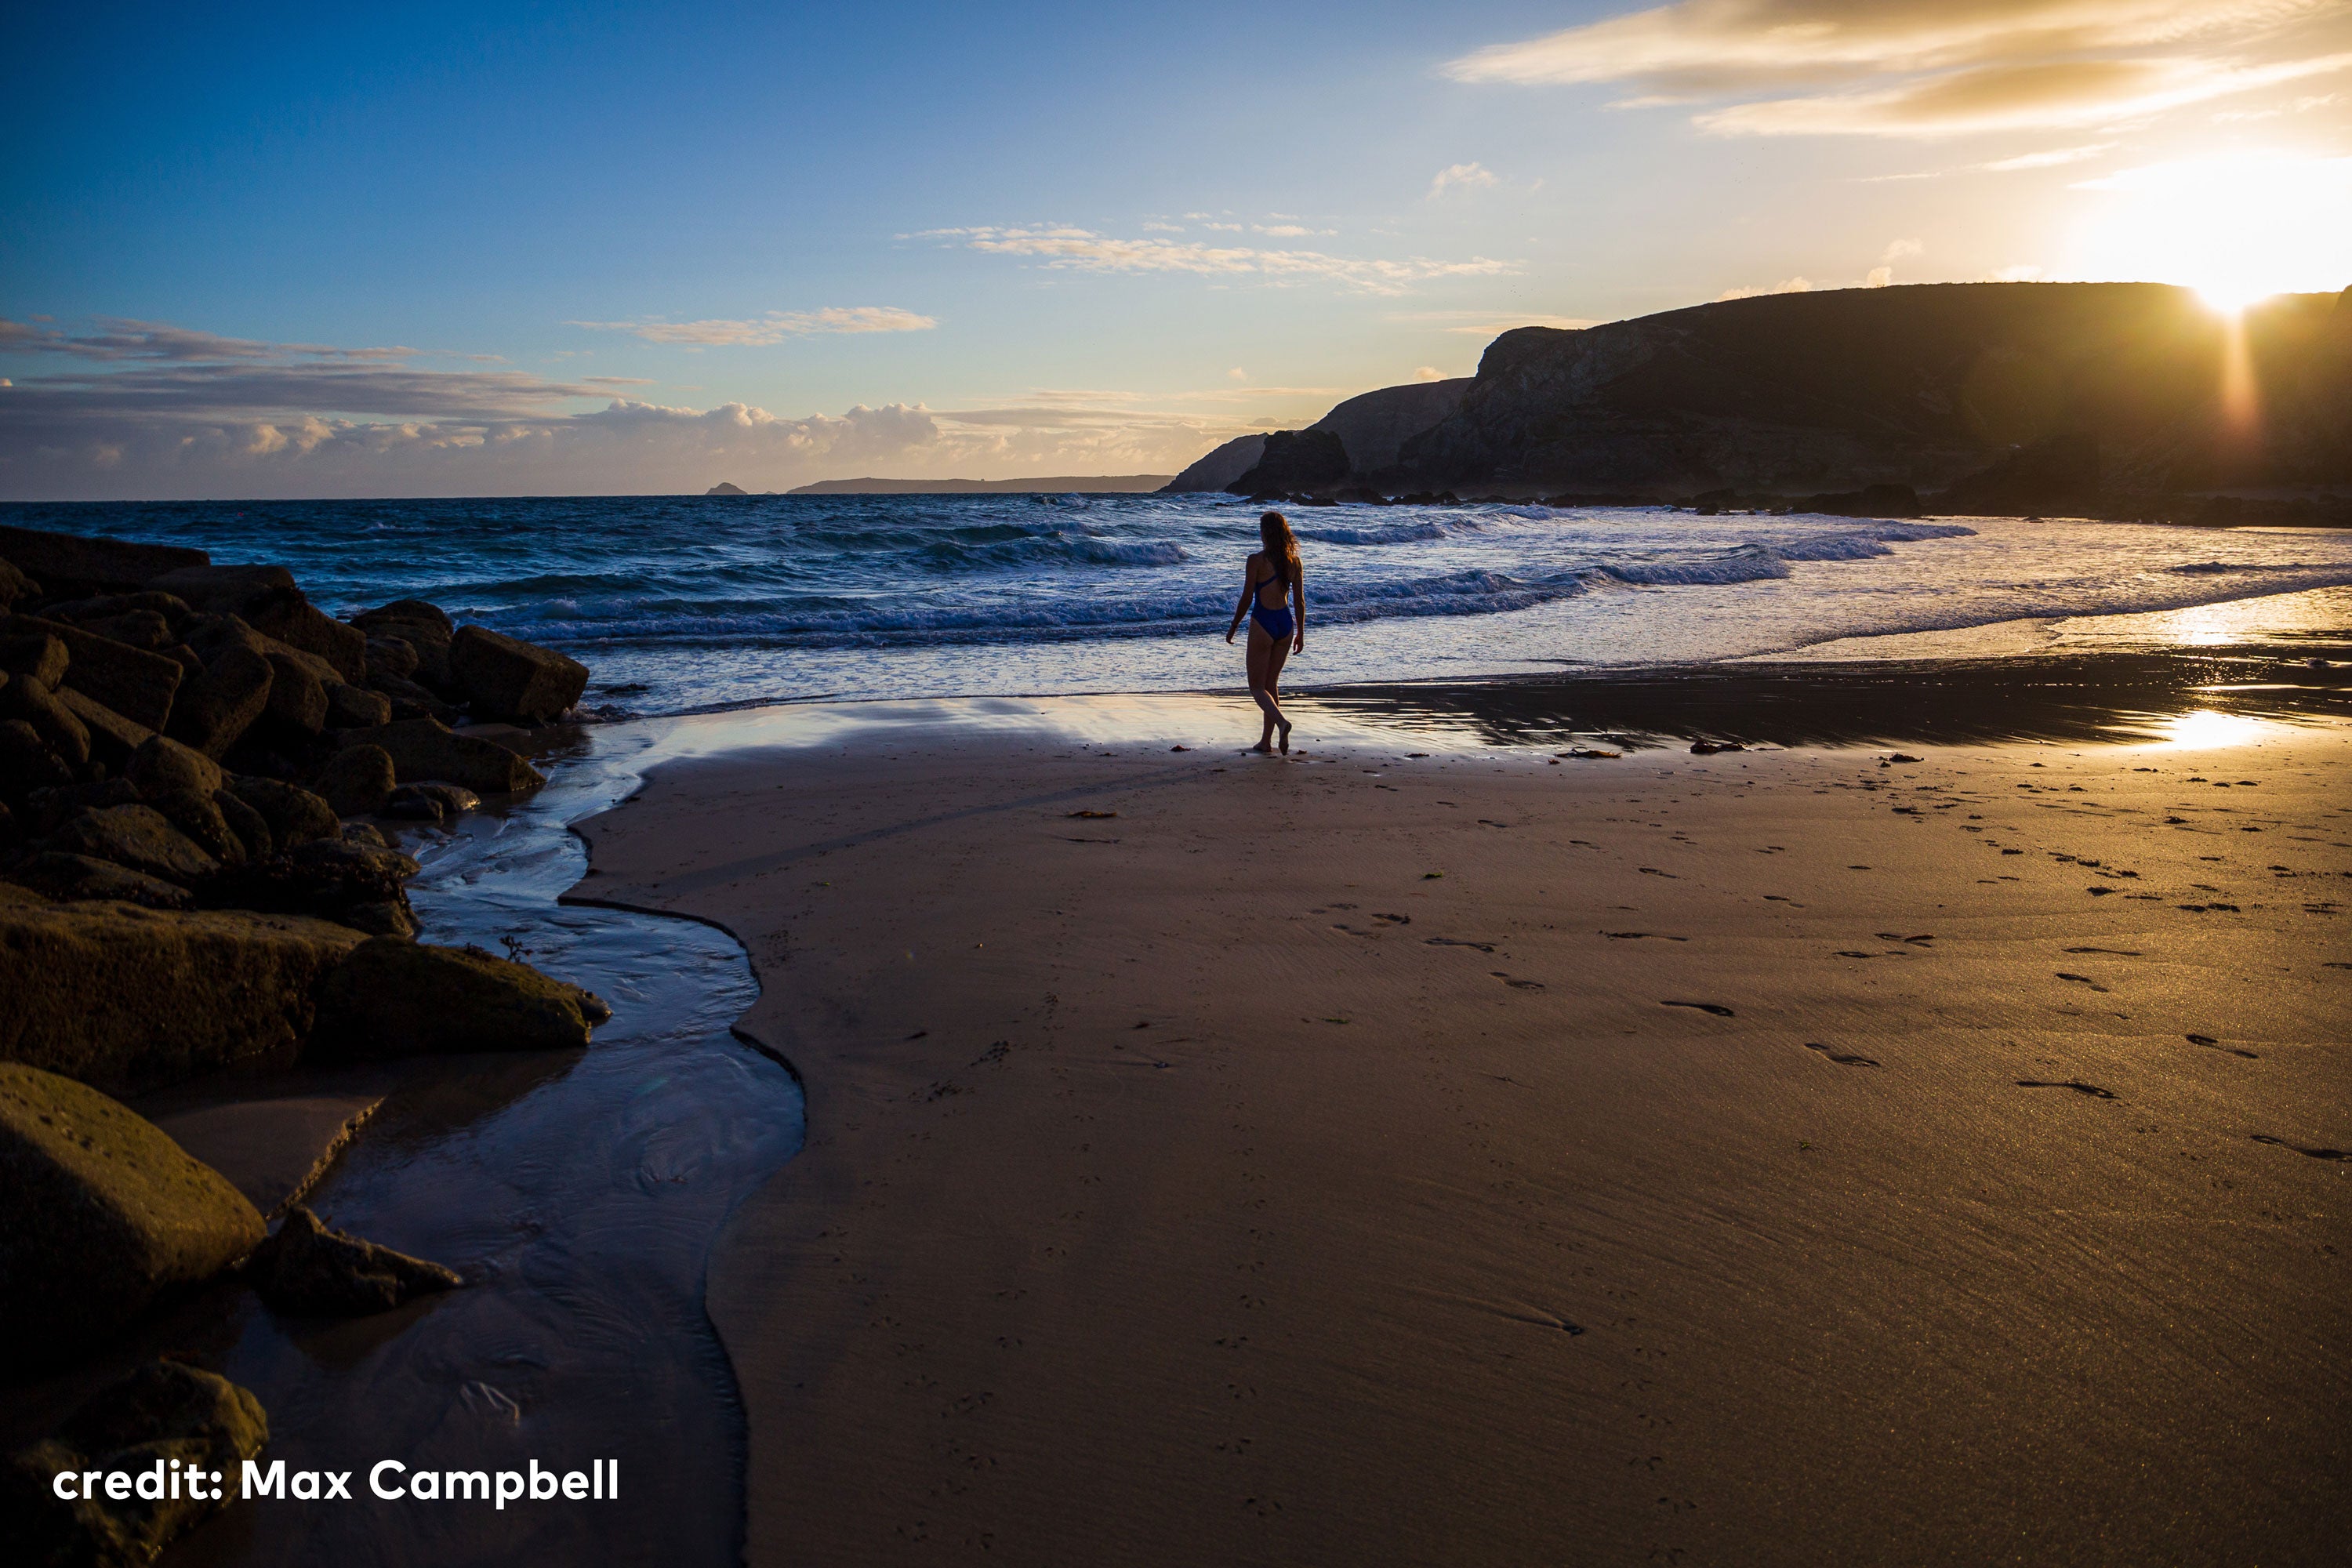 A woman waking towards an incoming tide on the beach at sunset